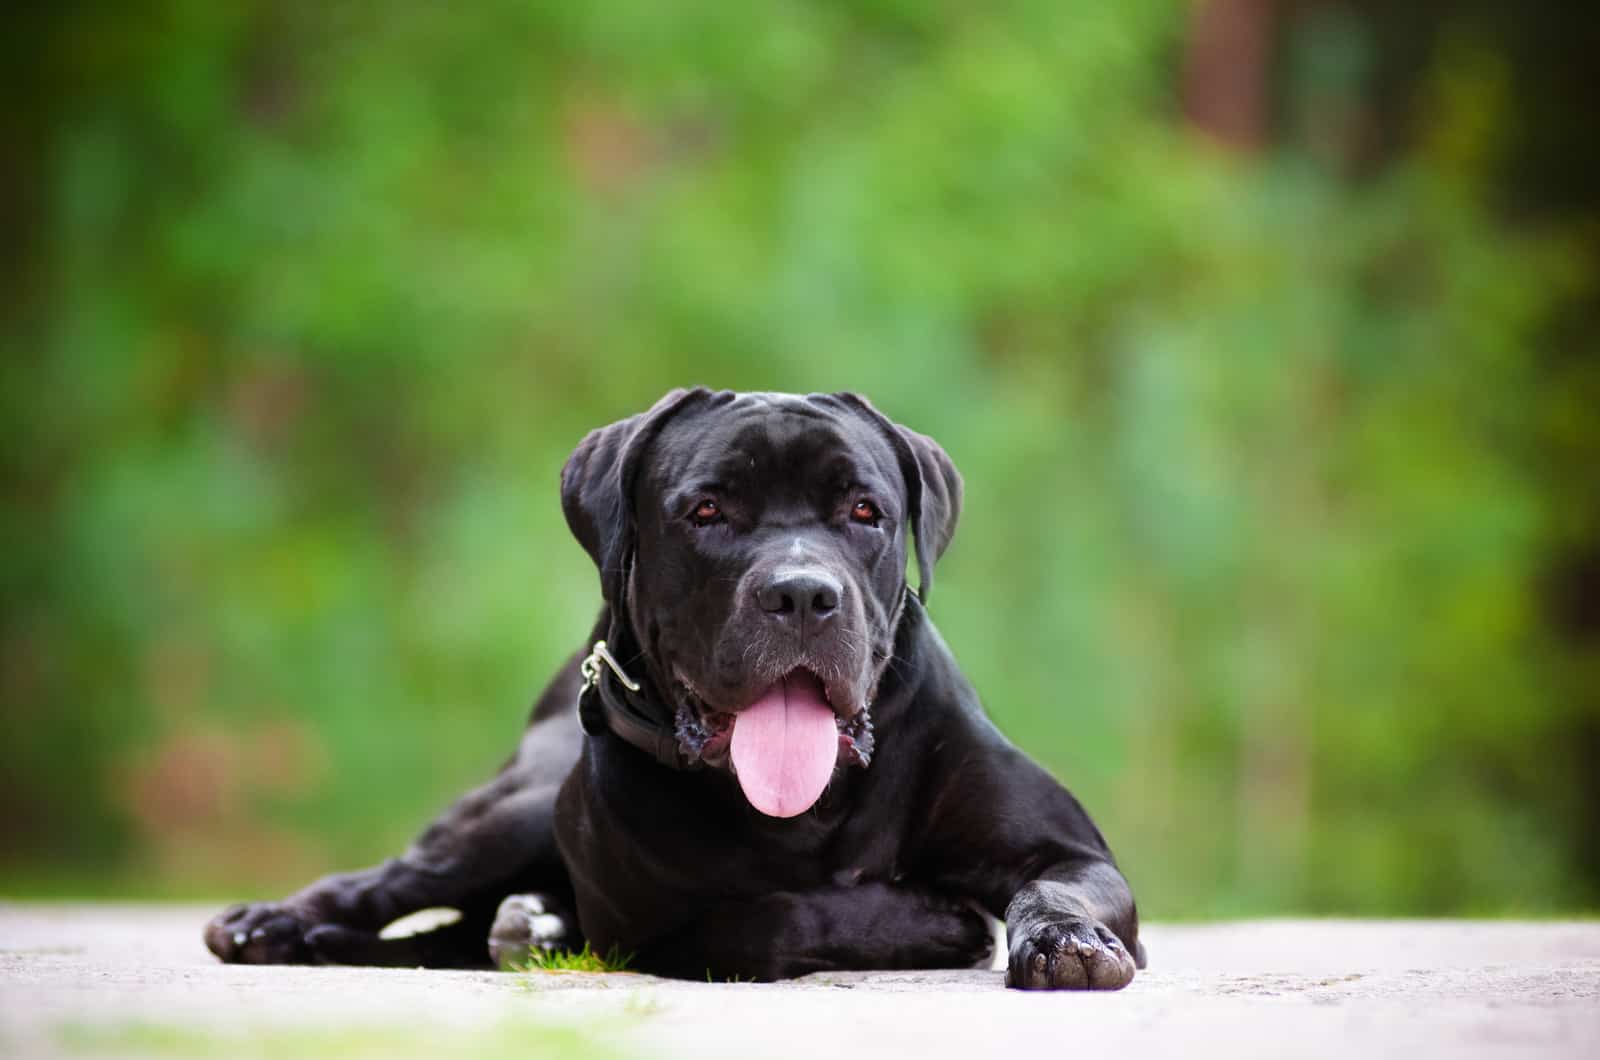 10 Best Brush For Cane Corso: Brushes For A Luxurious Shine